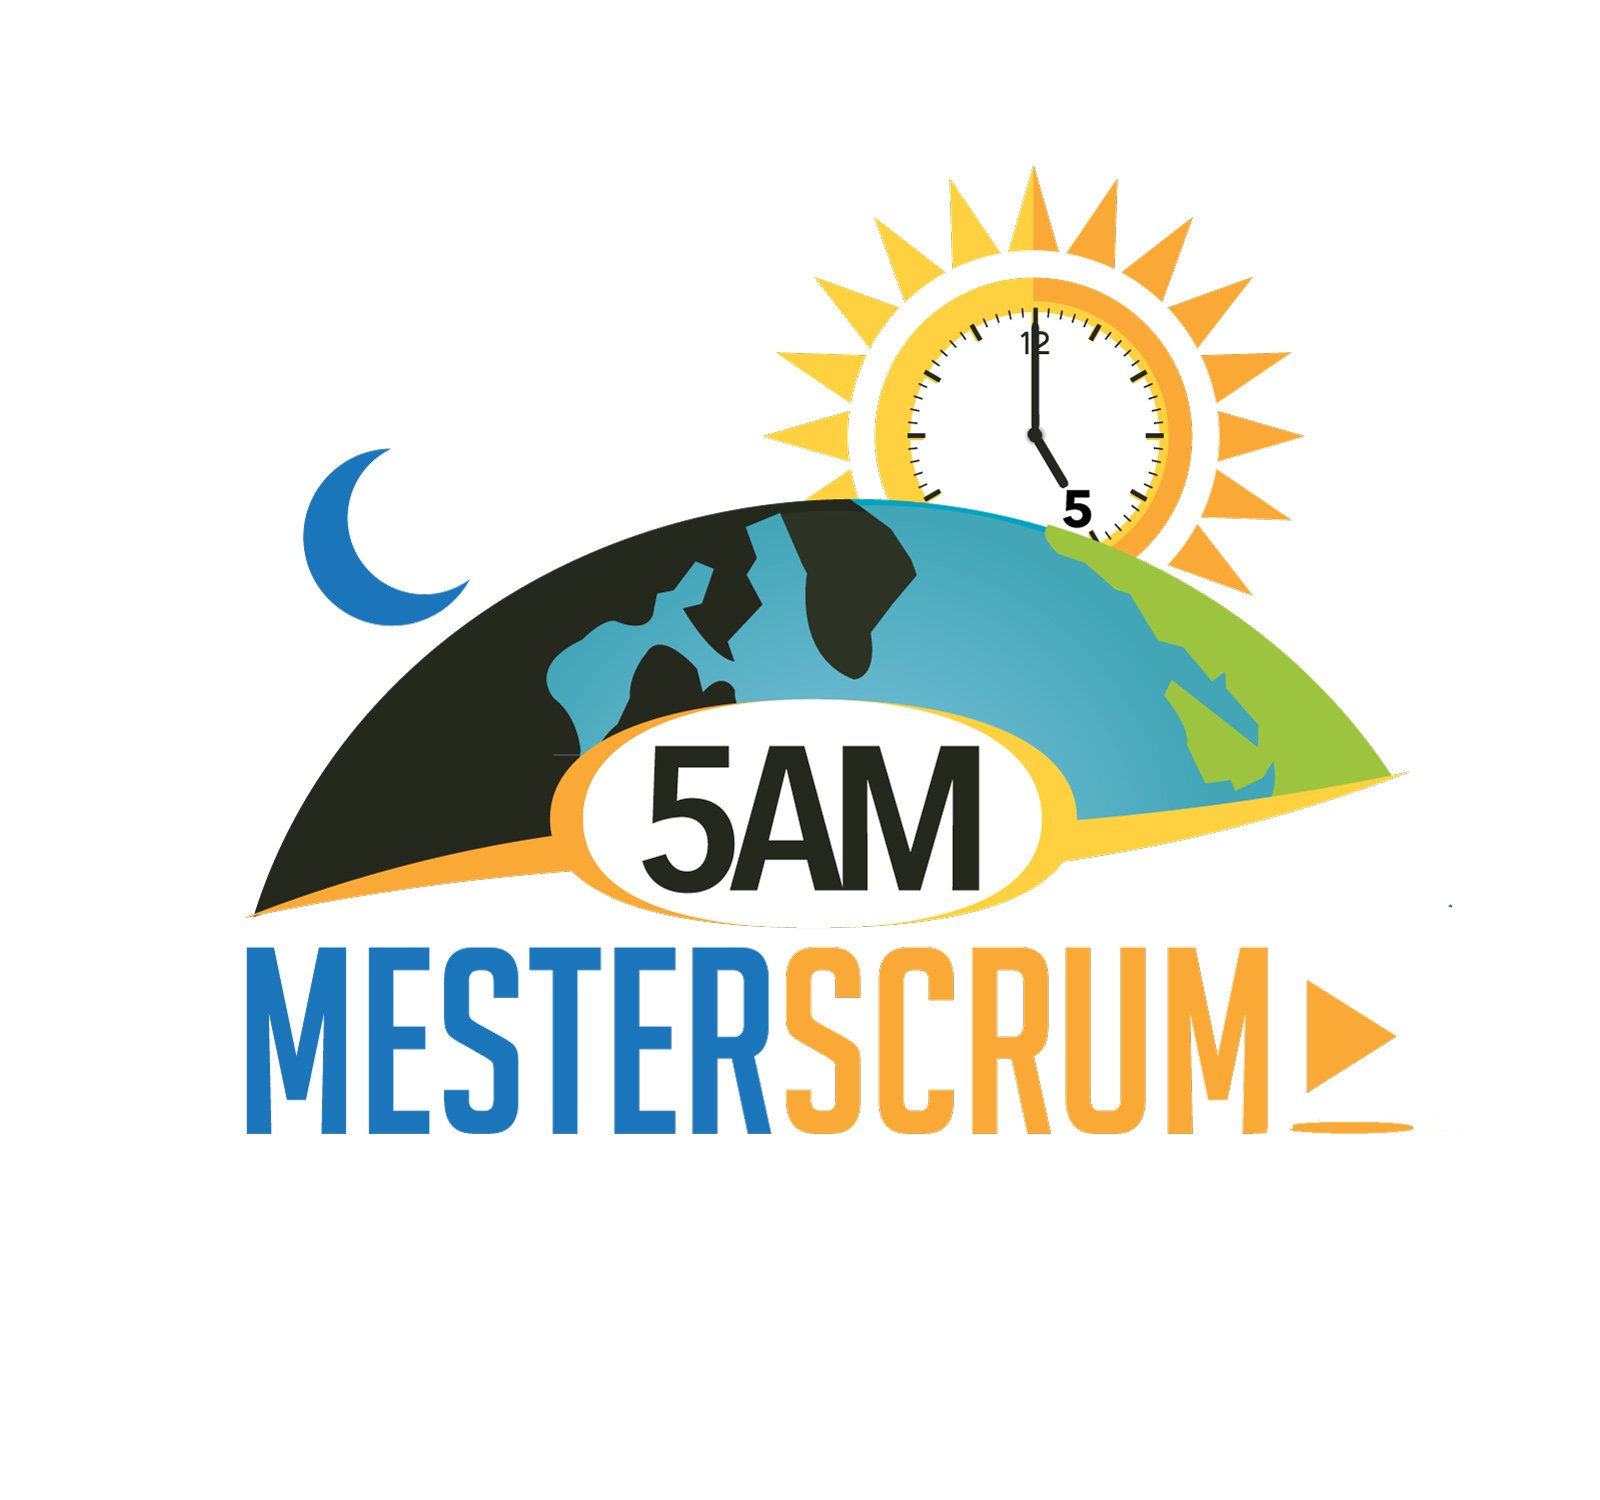 5am Mester Scrum is about real life practicing agile and scrum.  We talk about maybe 2 micro Scrum or Agile topics for anyone to use in their day.